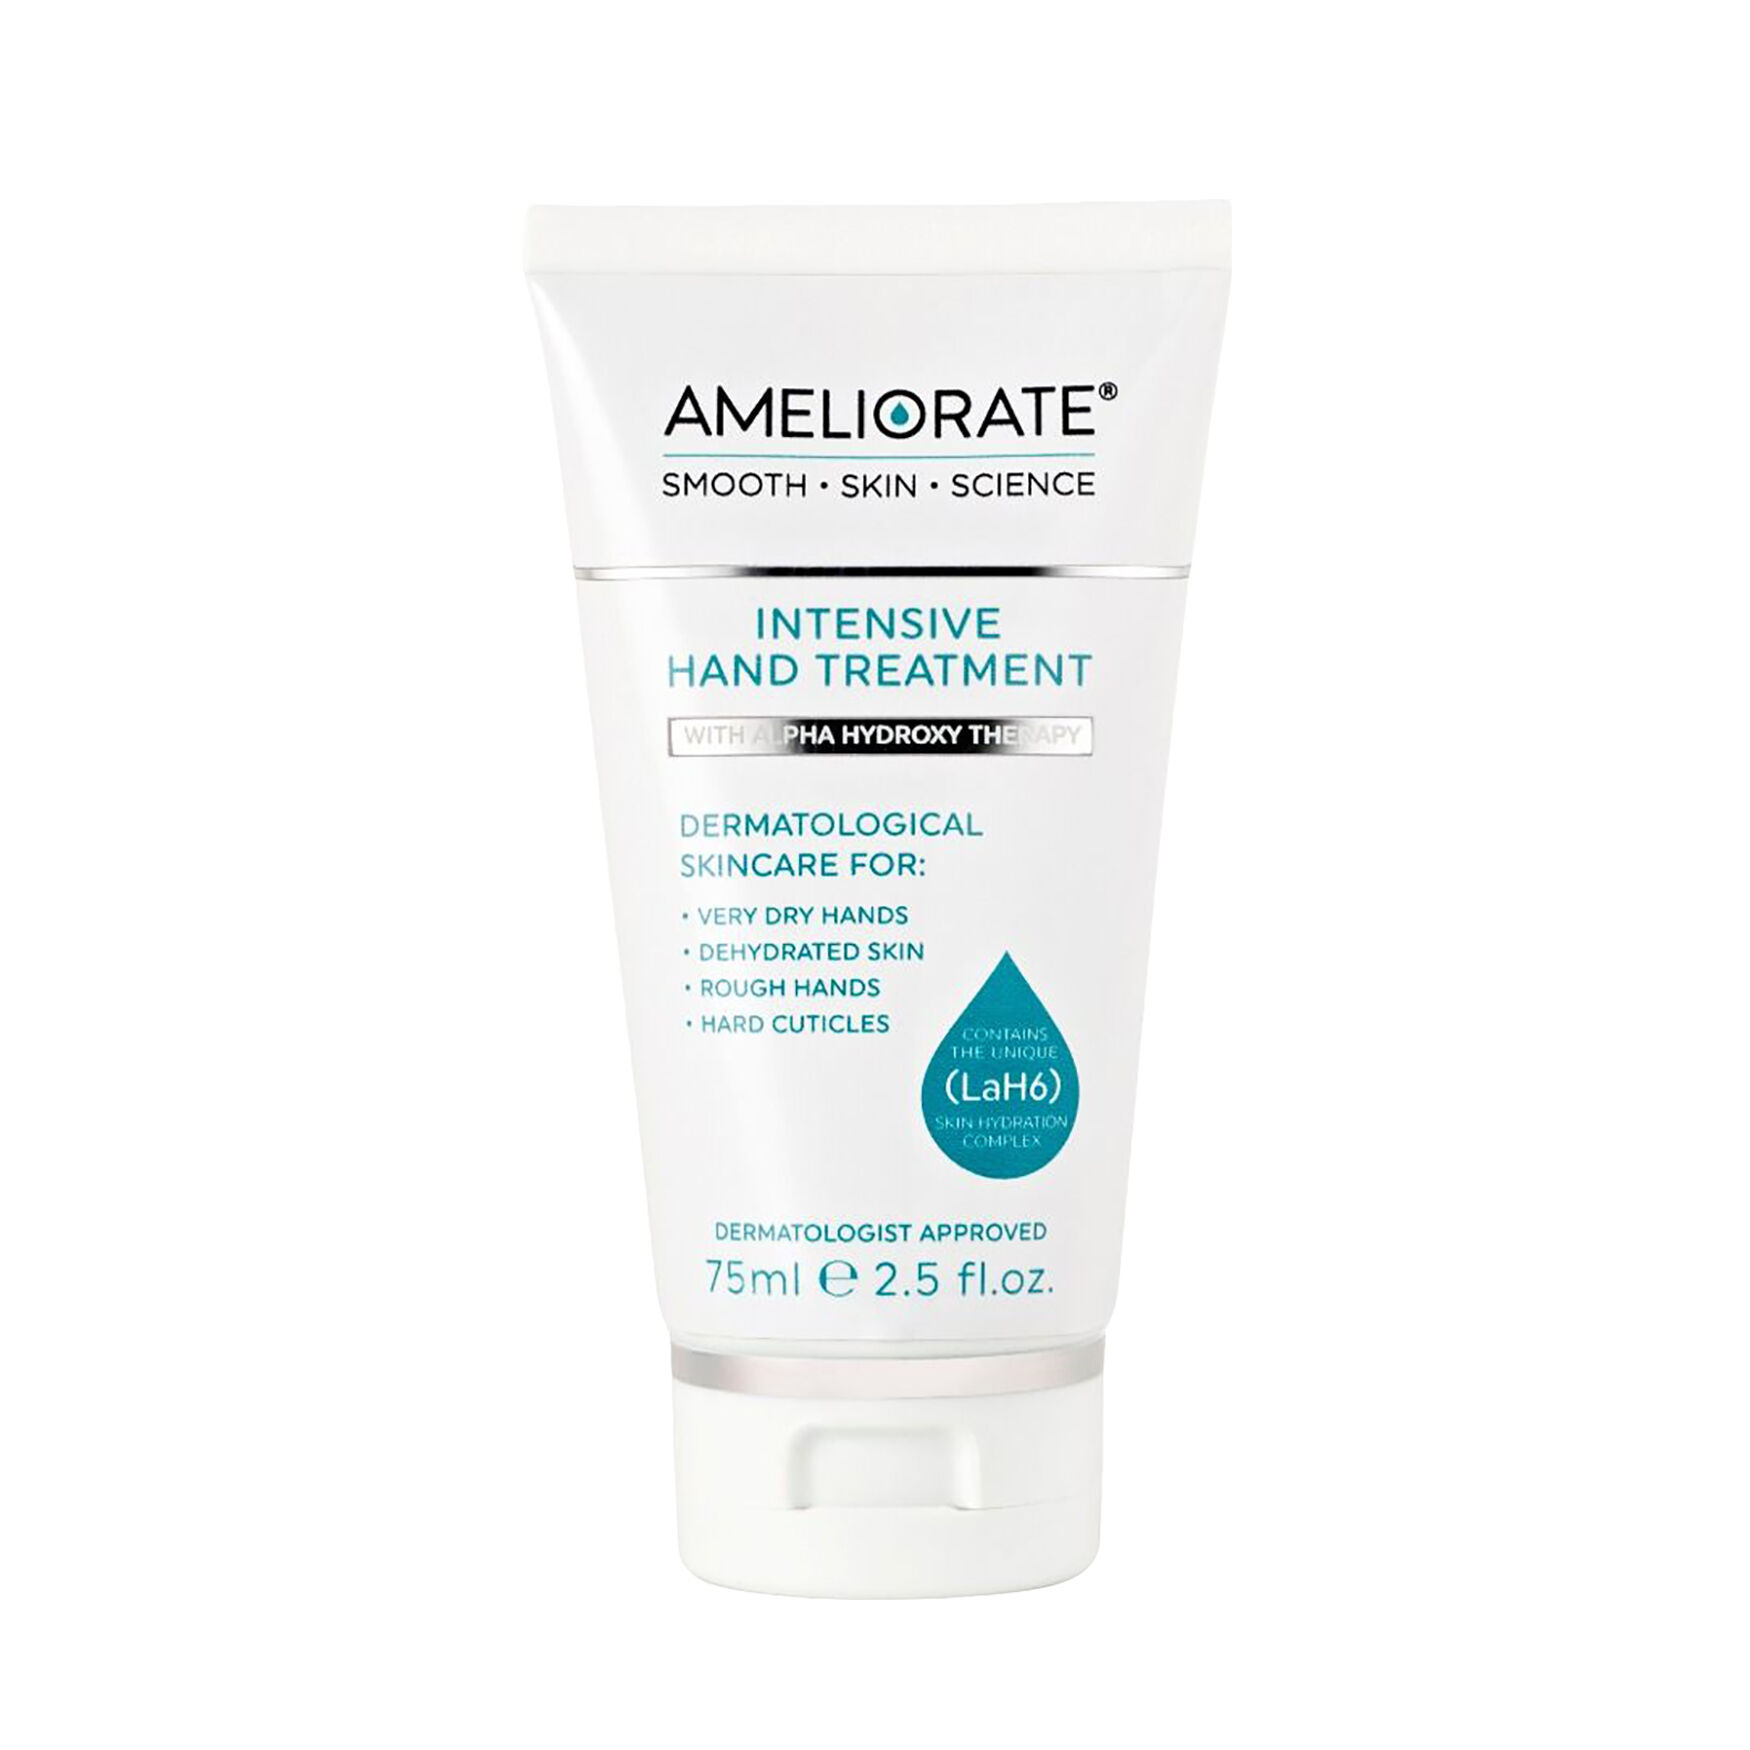 AMELIORATE INTENSIVE HAND TREATMENT